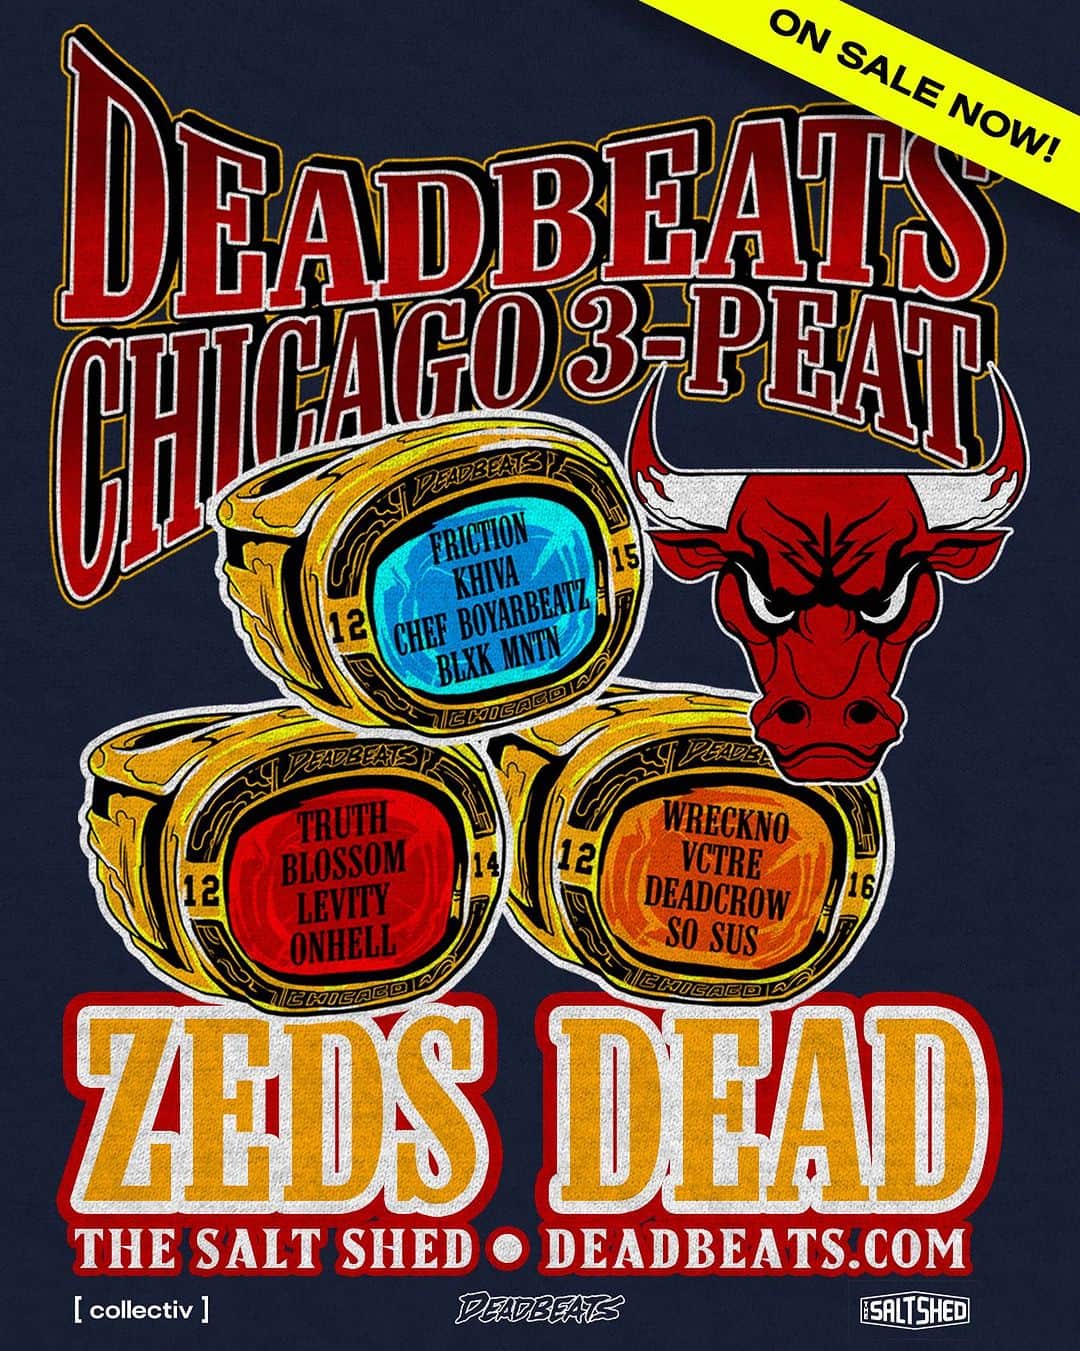 Zeds Deadのインスタグラム：「DEADBEATS CHICAGO 3-PEAT TICKETS ONSALE NOW! See you Dec 14 + 15 + 16 for 3 nights at ZEDS SHED with our all star Deadbeats team ☄️ ticket link in bio!」